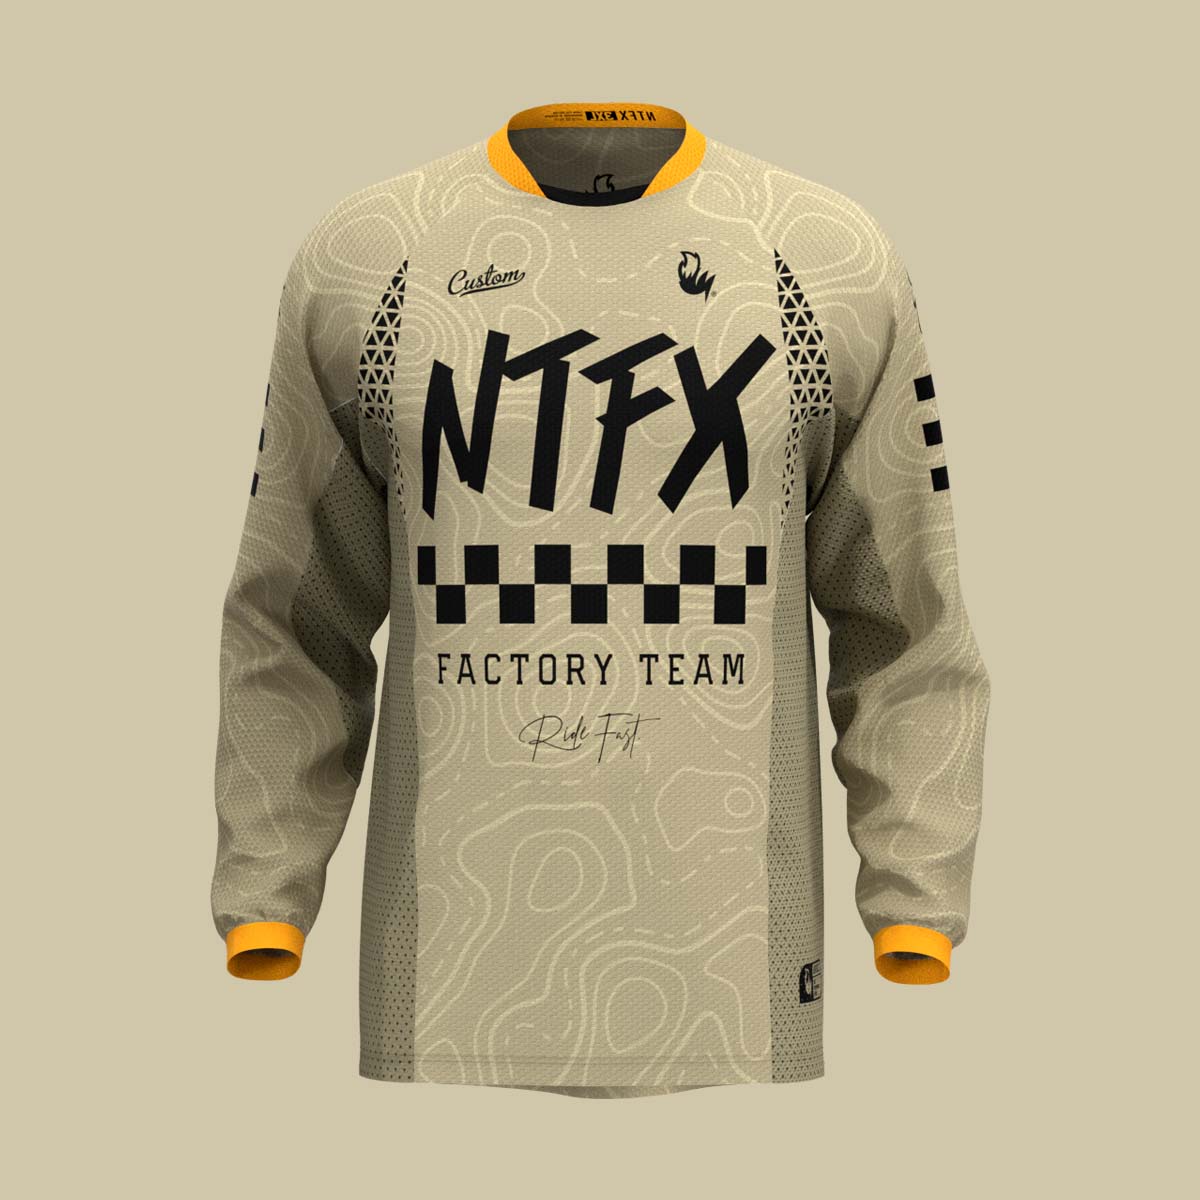 Airforce Loose Fit MTB shirt by Nightfox, fully customizable with all-over print capability and large mesh panels for optimal airflow